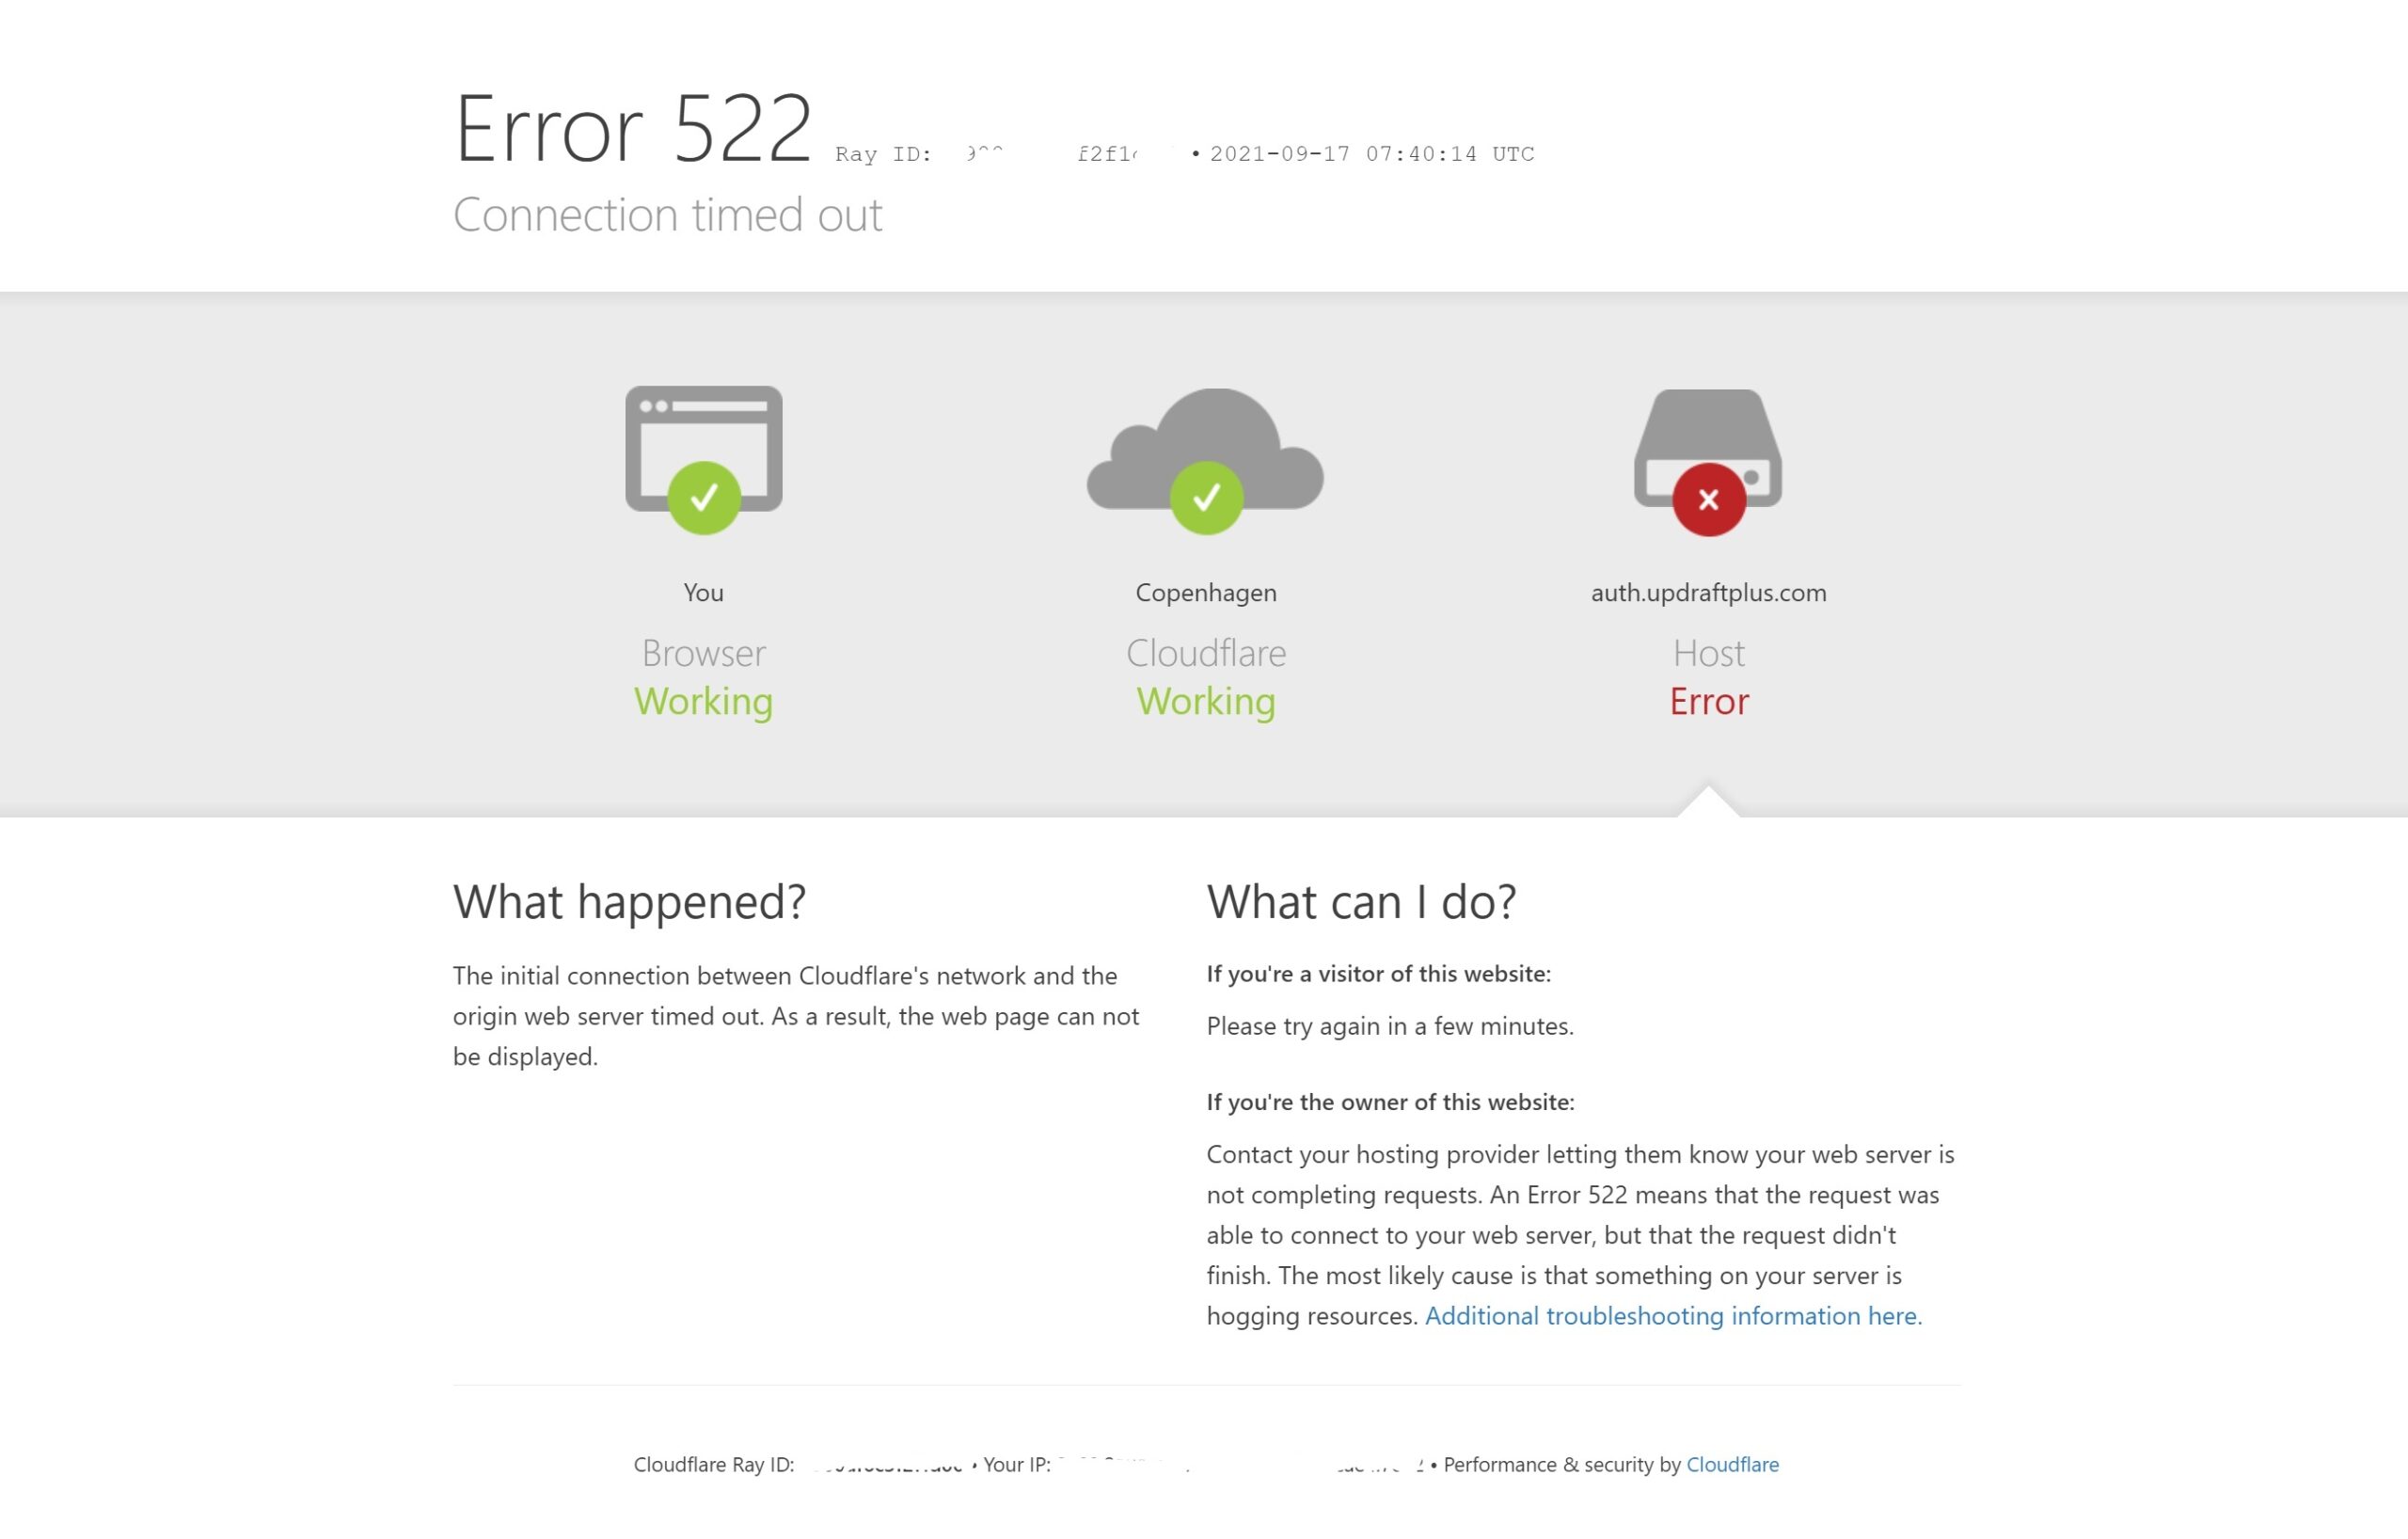 Error message from Cloudflare